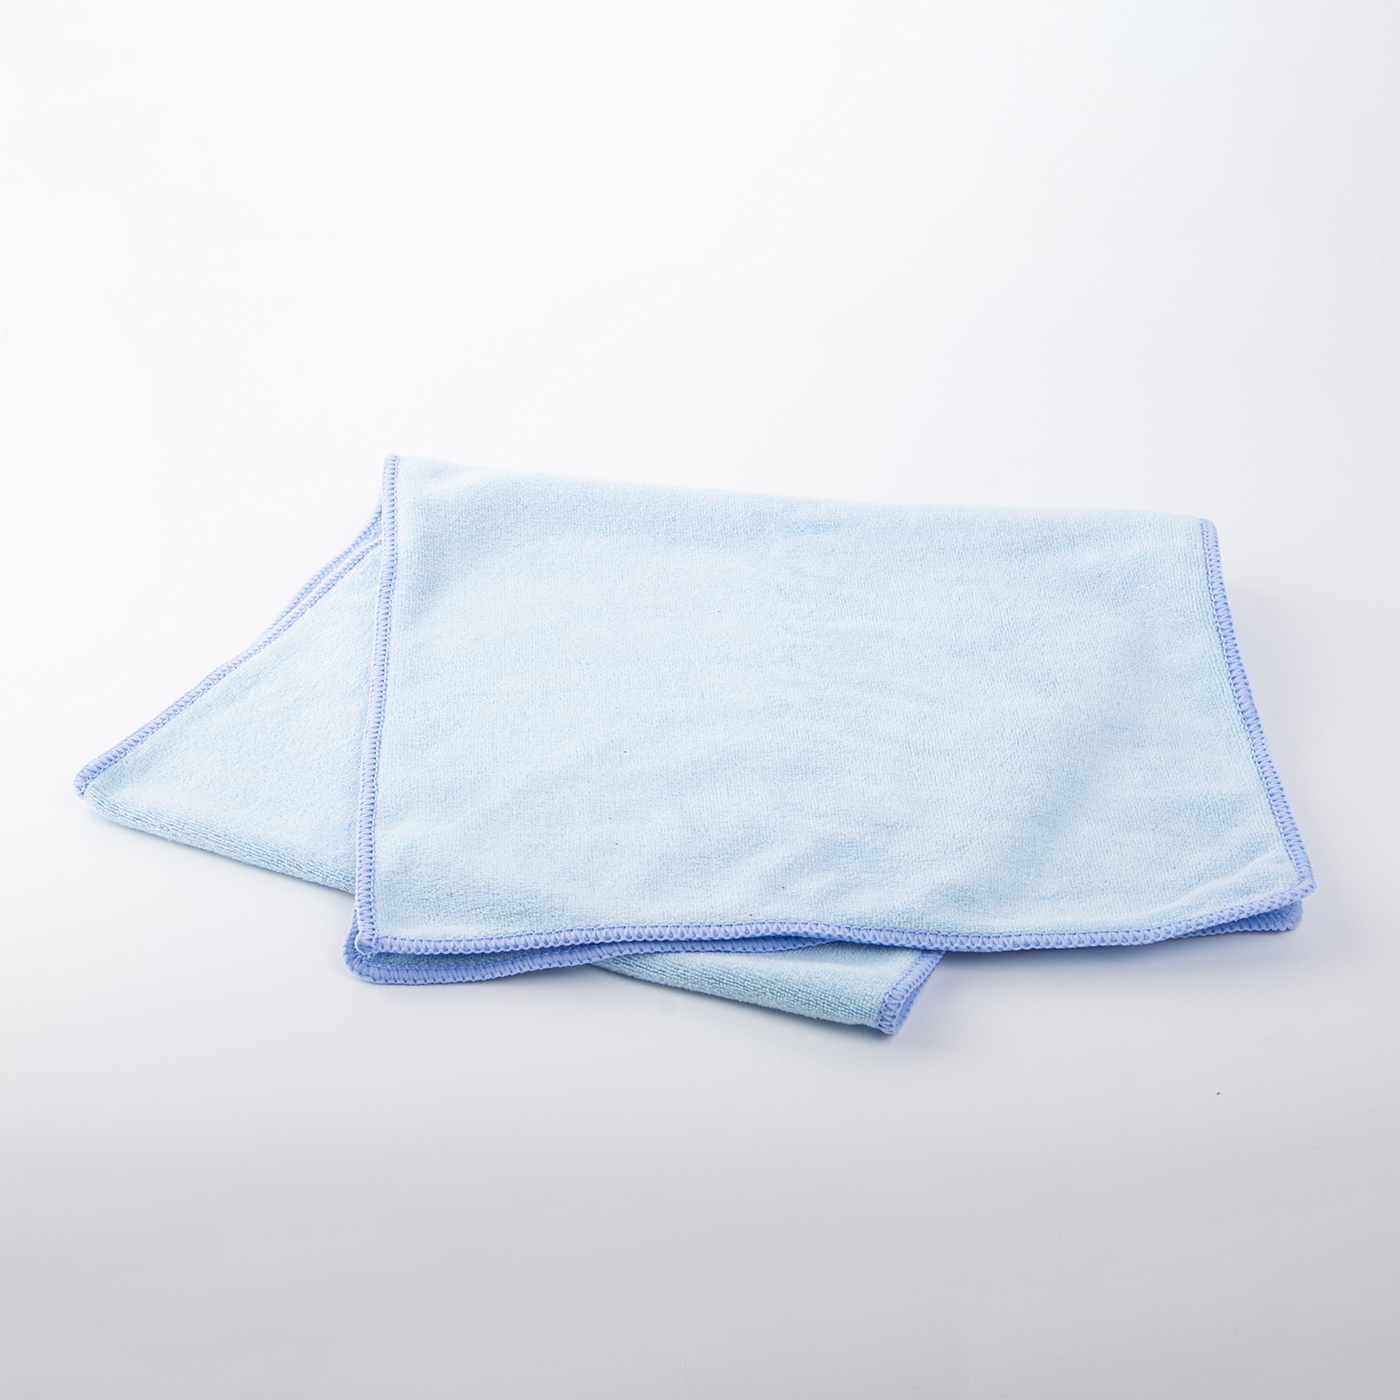 Premium Quick Dry Sports Towel With Mesh Bag3